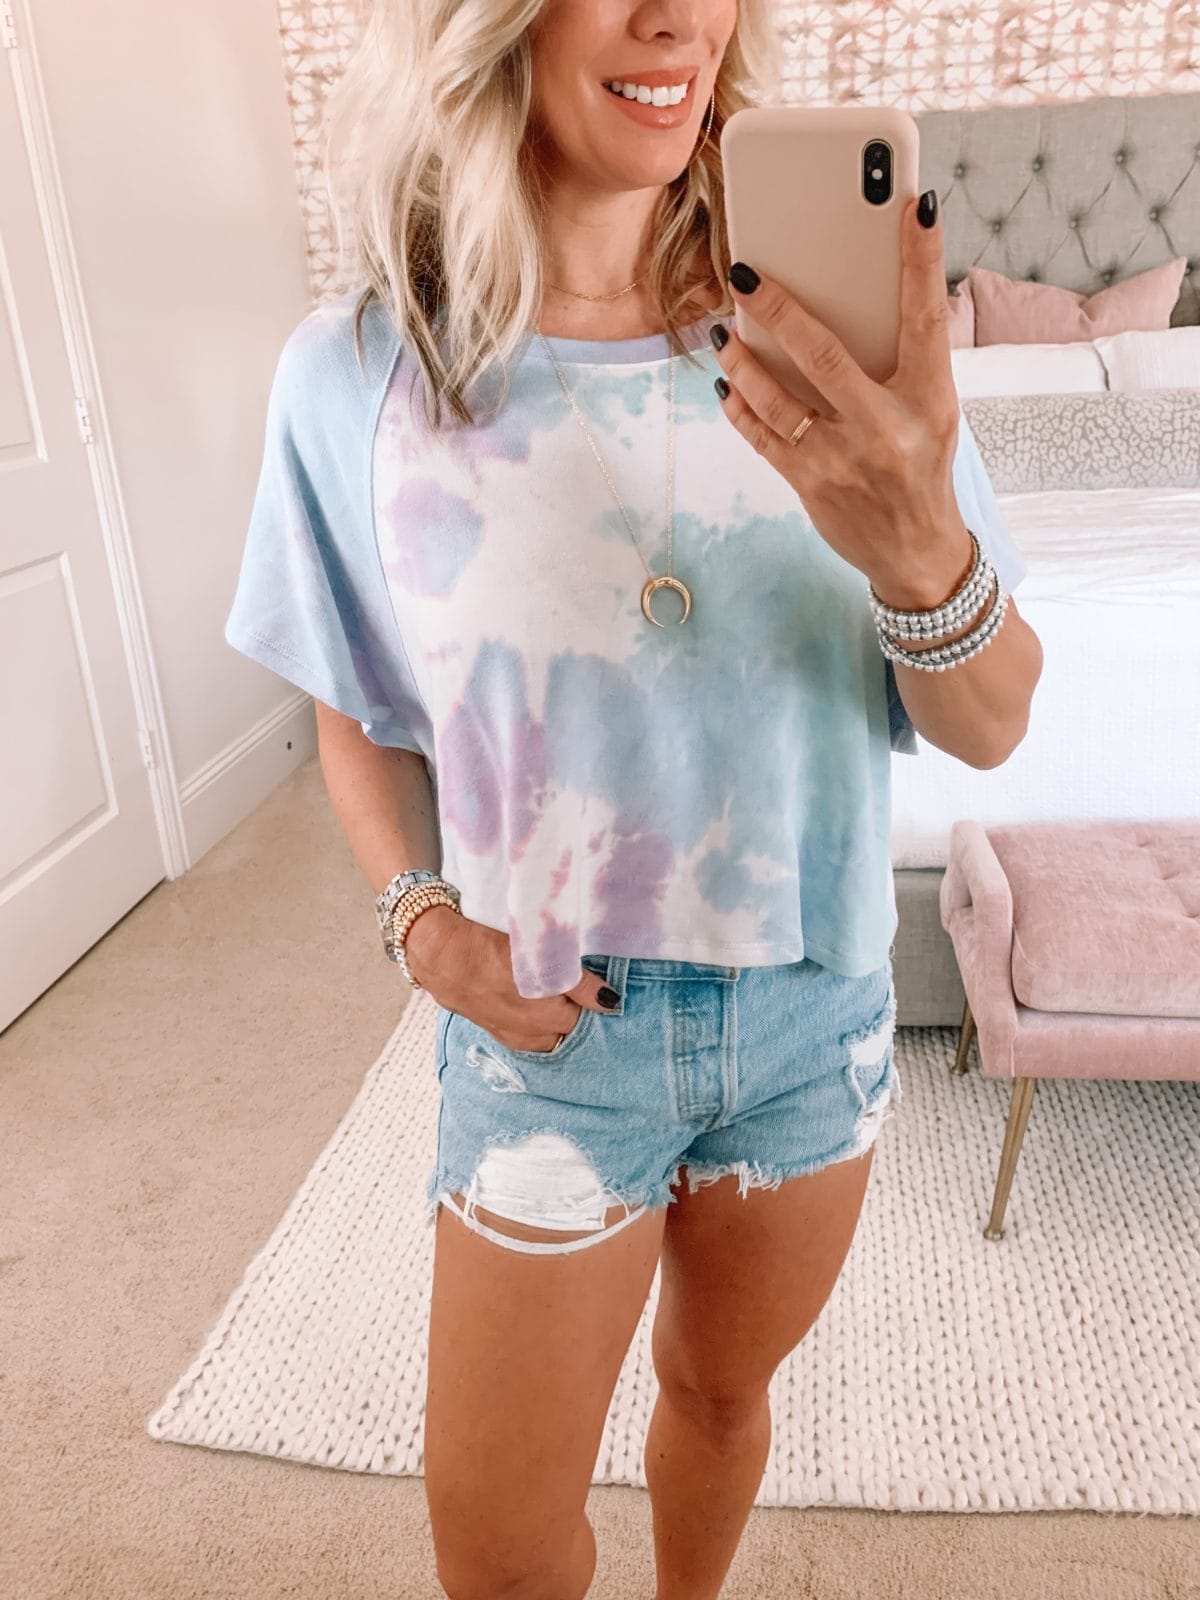 Red Dress Fashion Finds, Tie Dye Top, Jeans Shorts